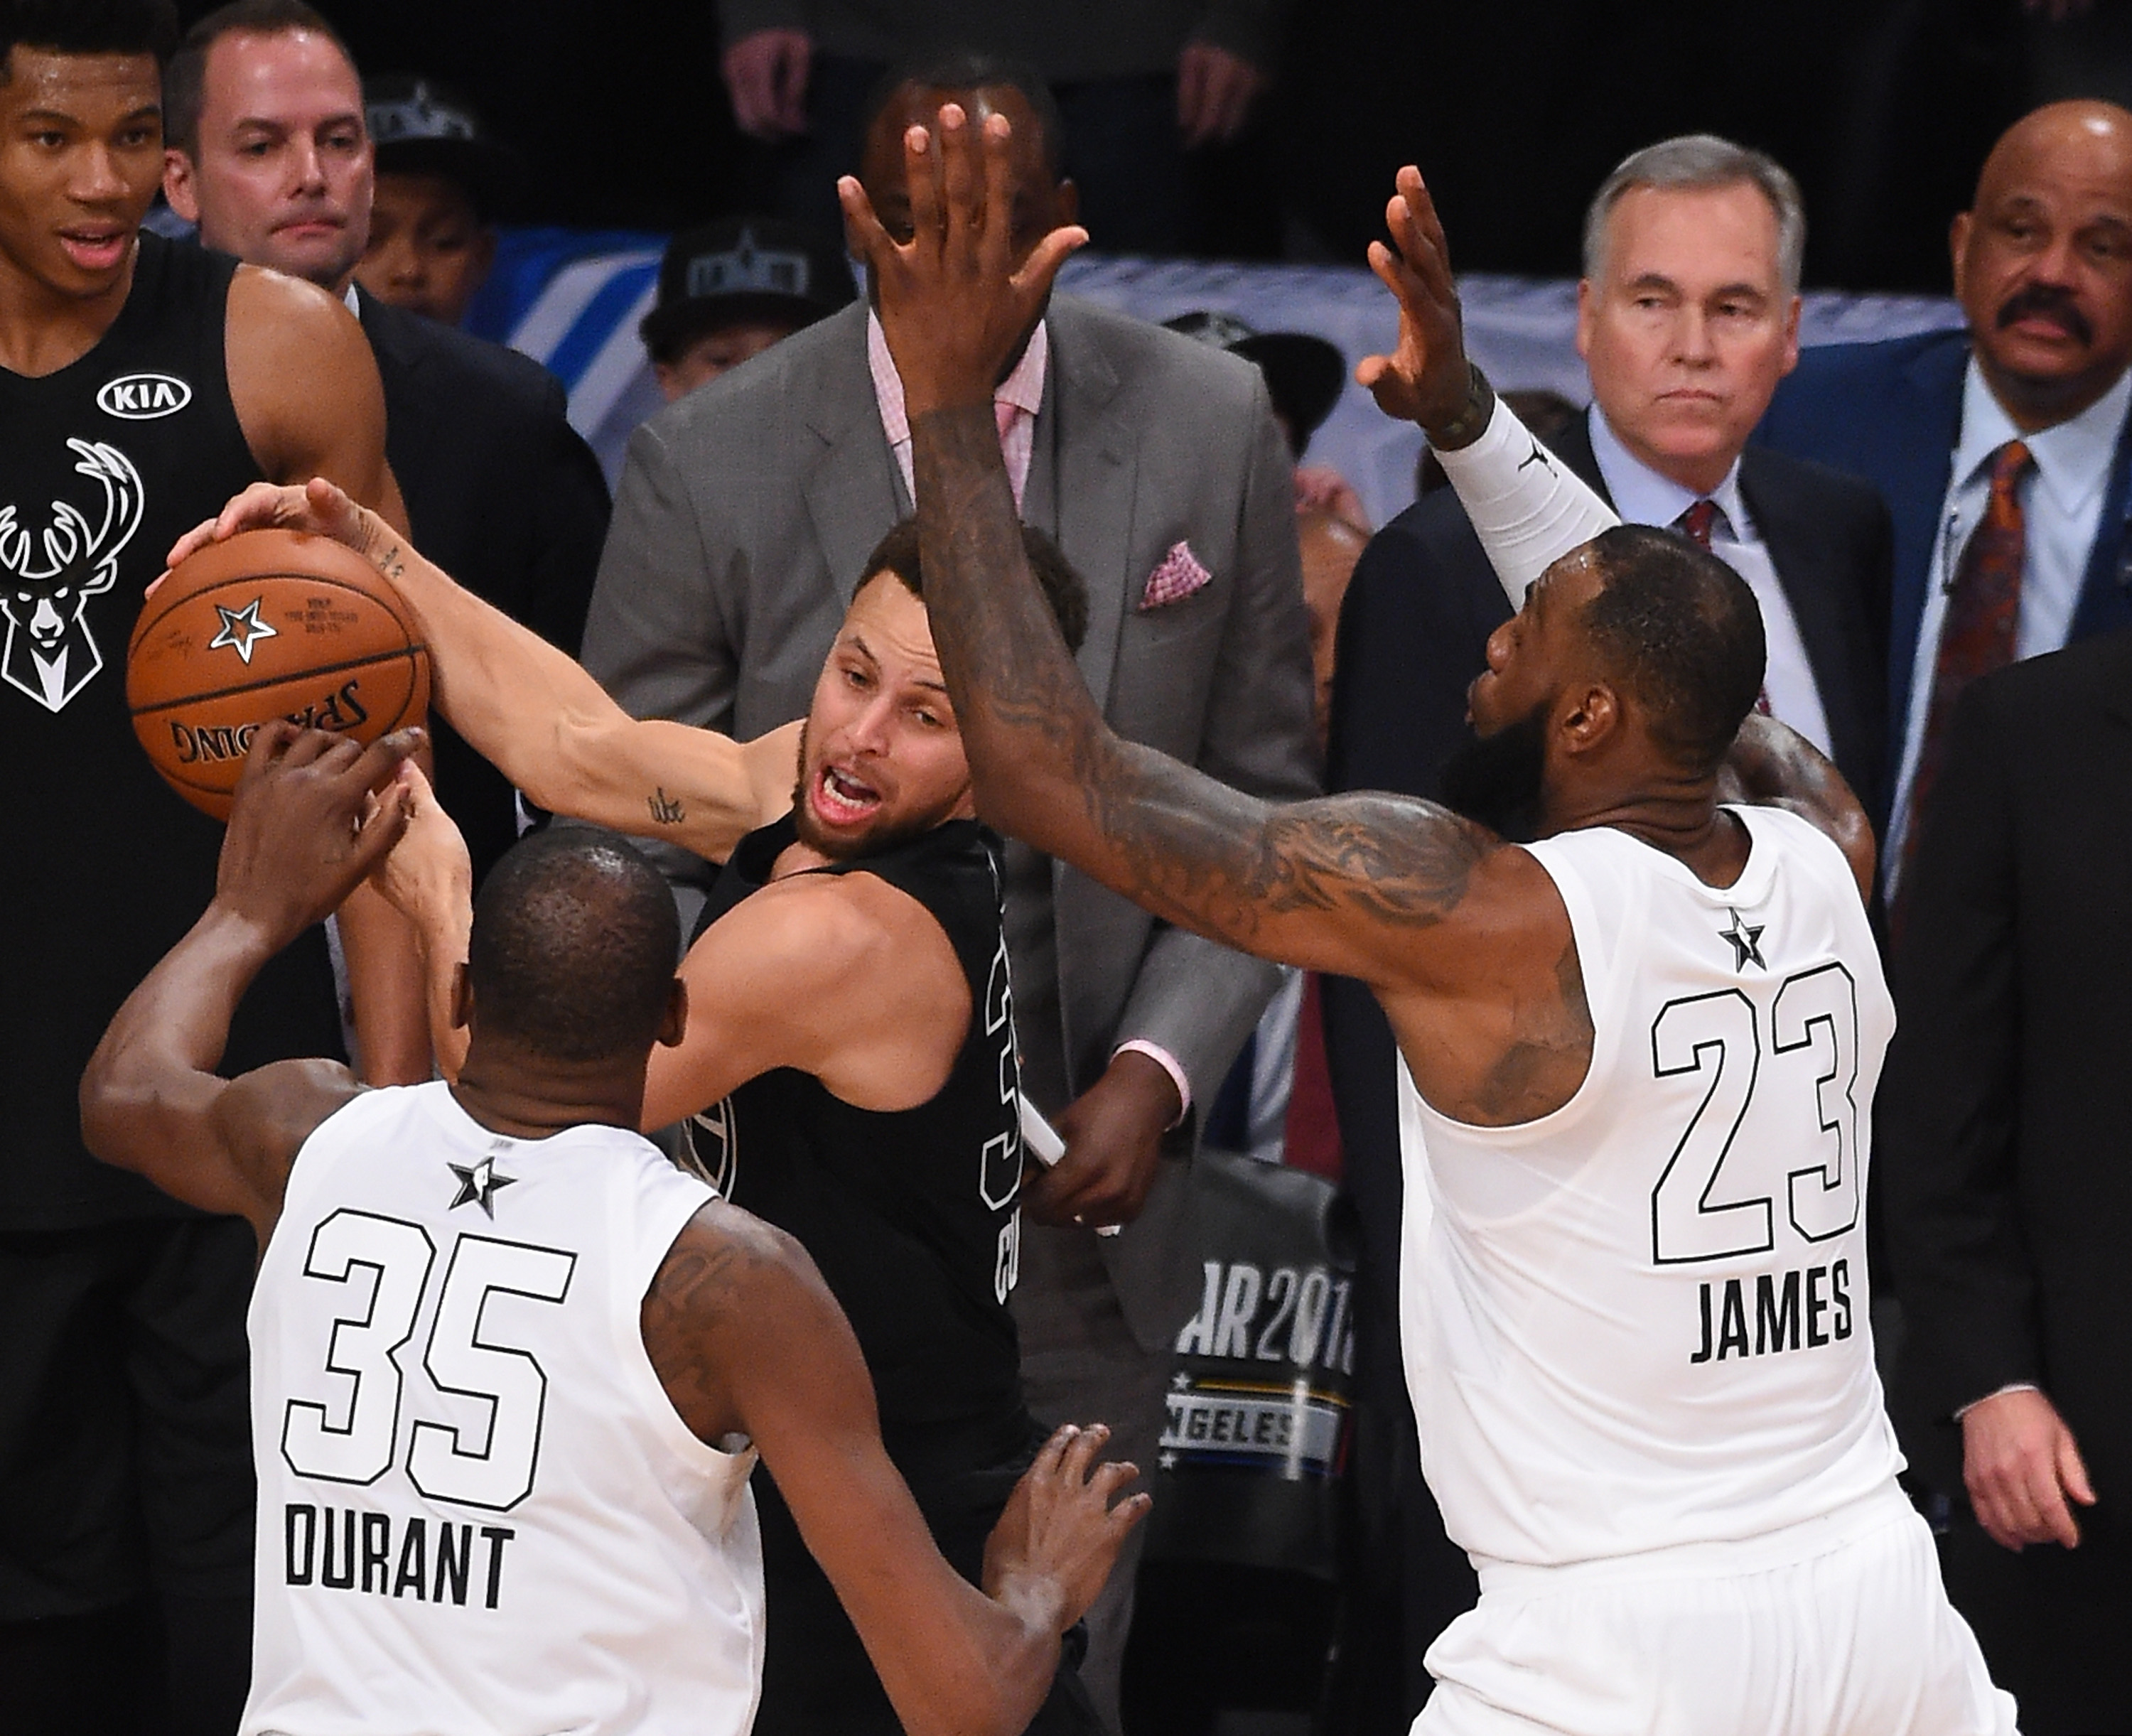 Steph Curry trapped by LeBron James and Kevin Durant in the All-Star Game. 